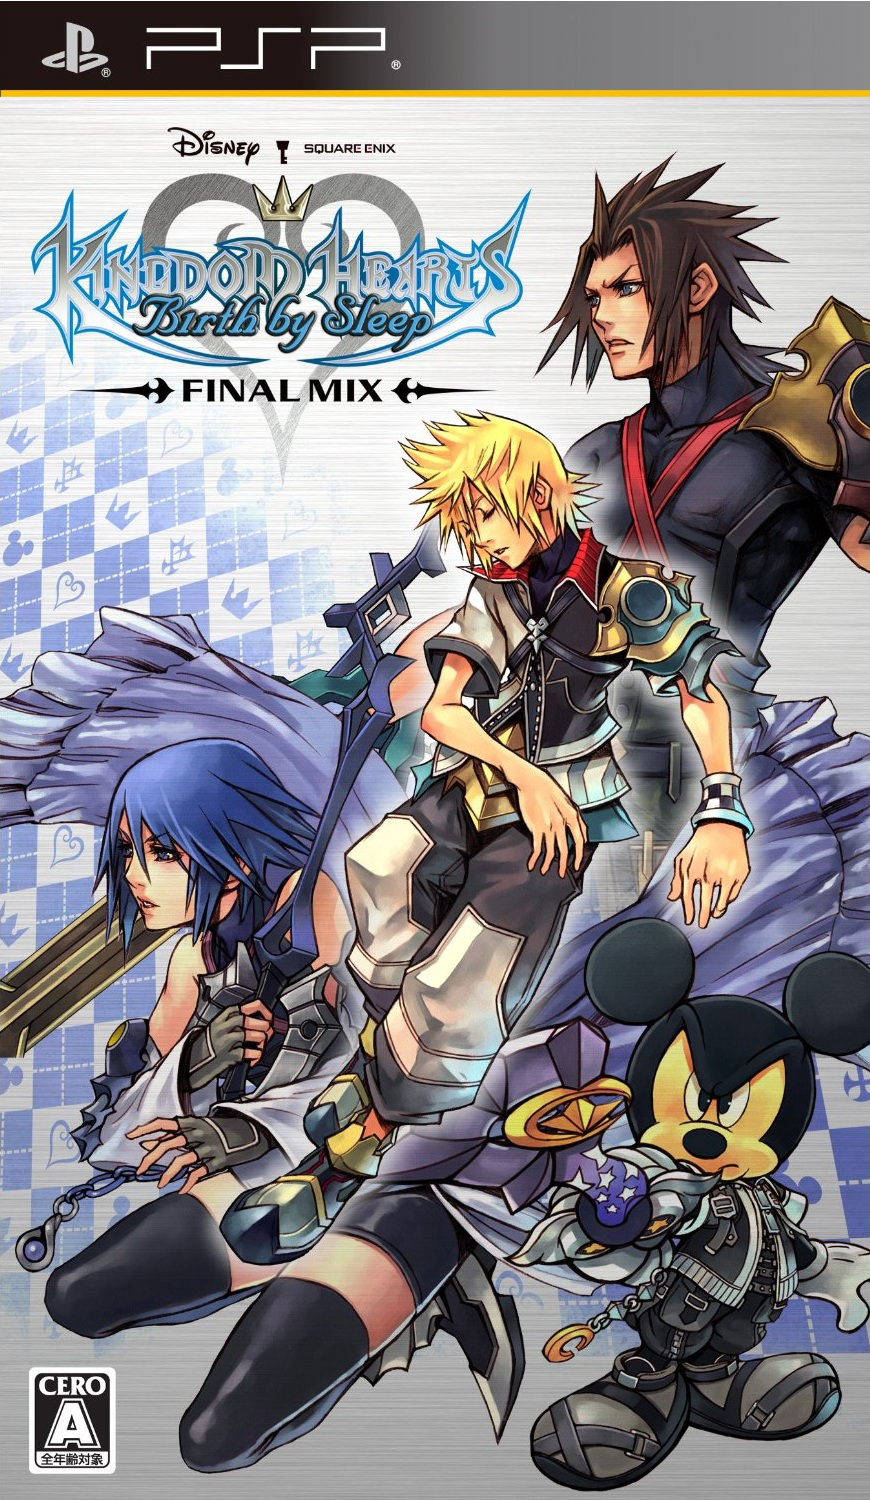 Kingdom hearts 4 cover art with all the characters